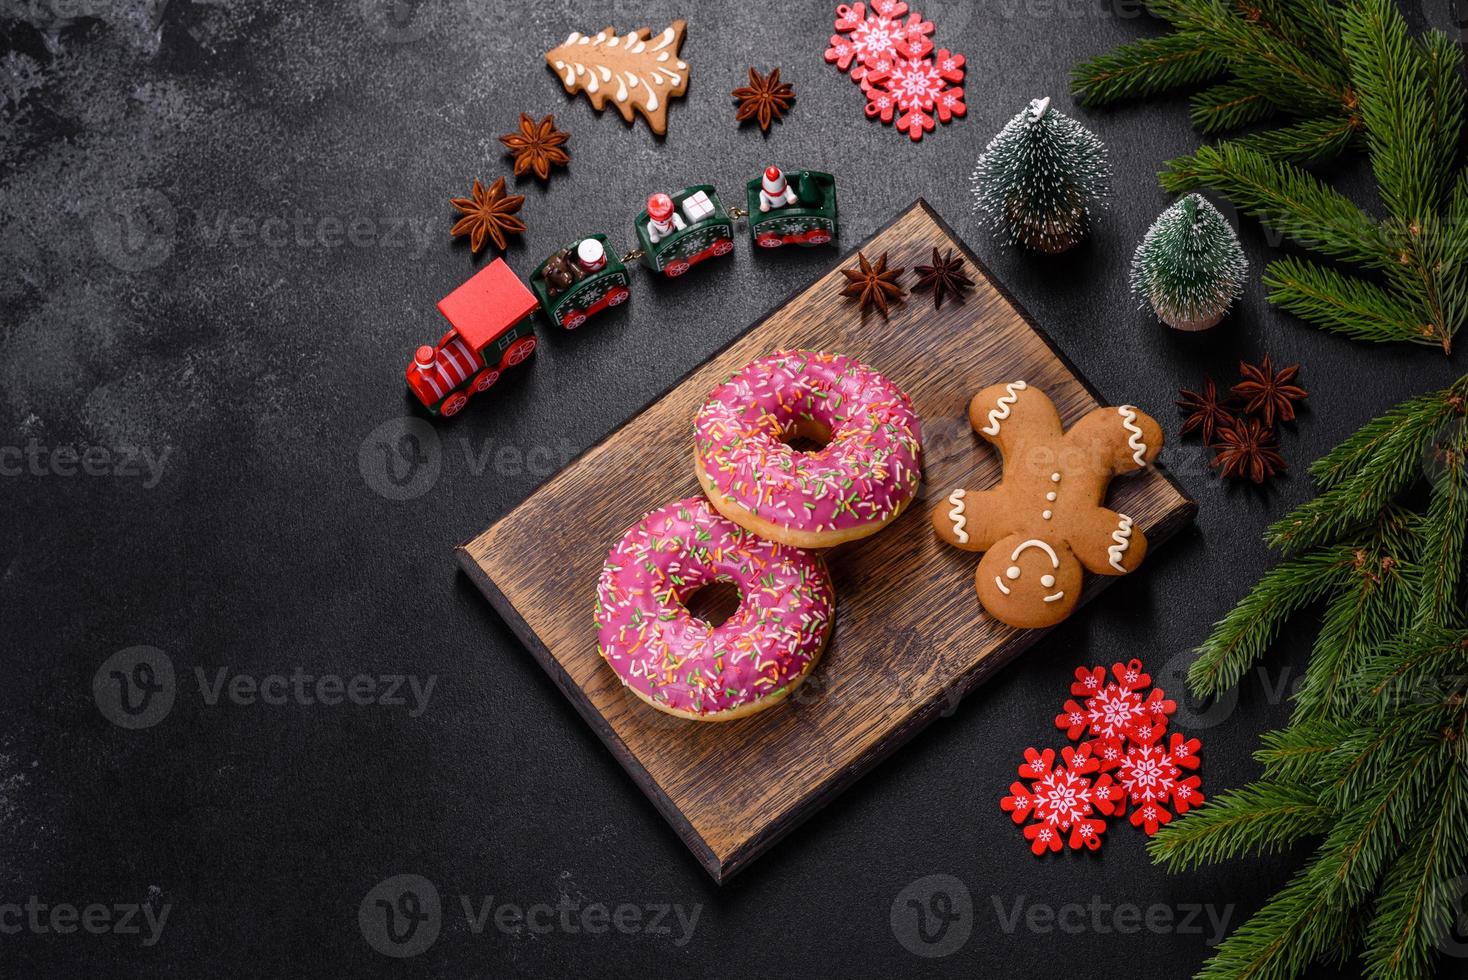 A beautiful doughnut with pink glaze and colored sprinkle on a christmas table photo